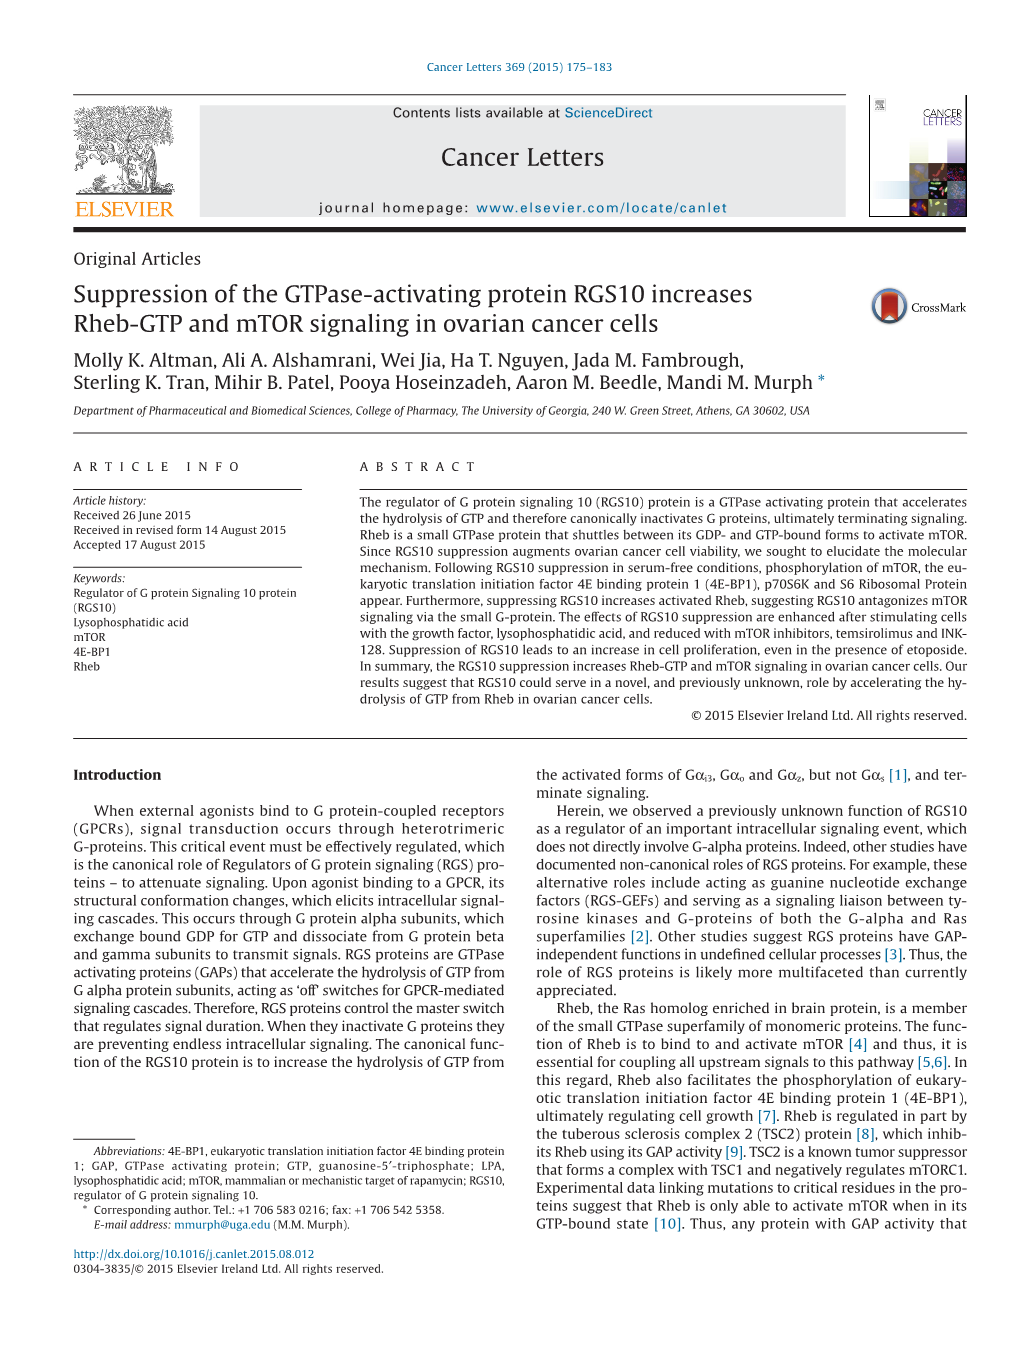 Suppression of the Gtpase-Activating Protein RGS10 Increases Rheb-GTP and Mtor Signaling in Ovarian Cancer Cells Molly K